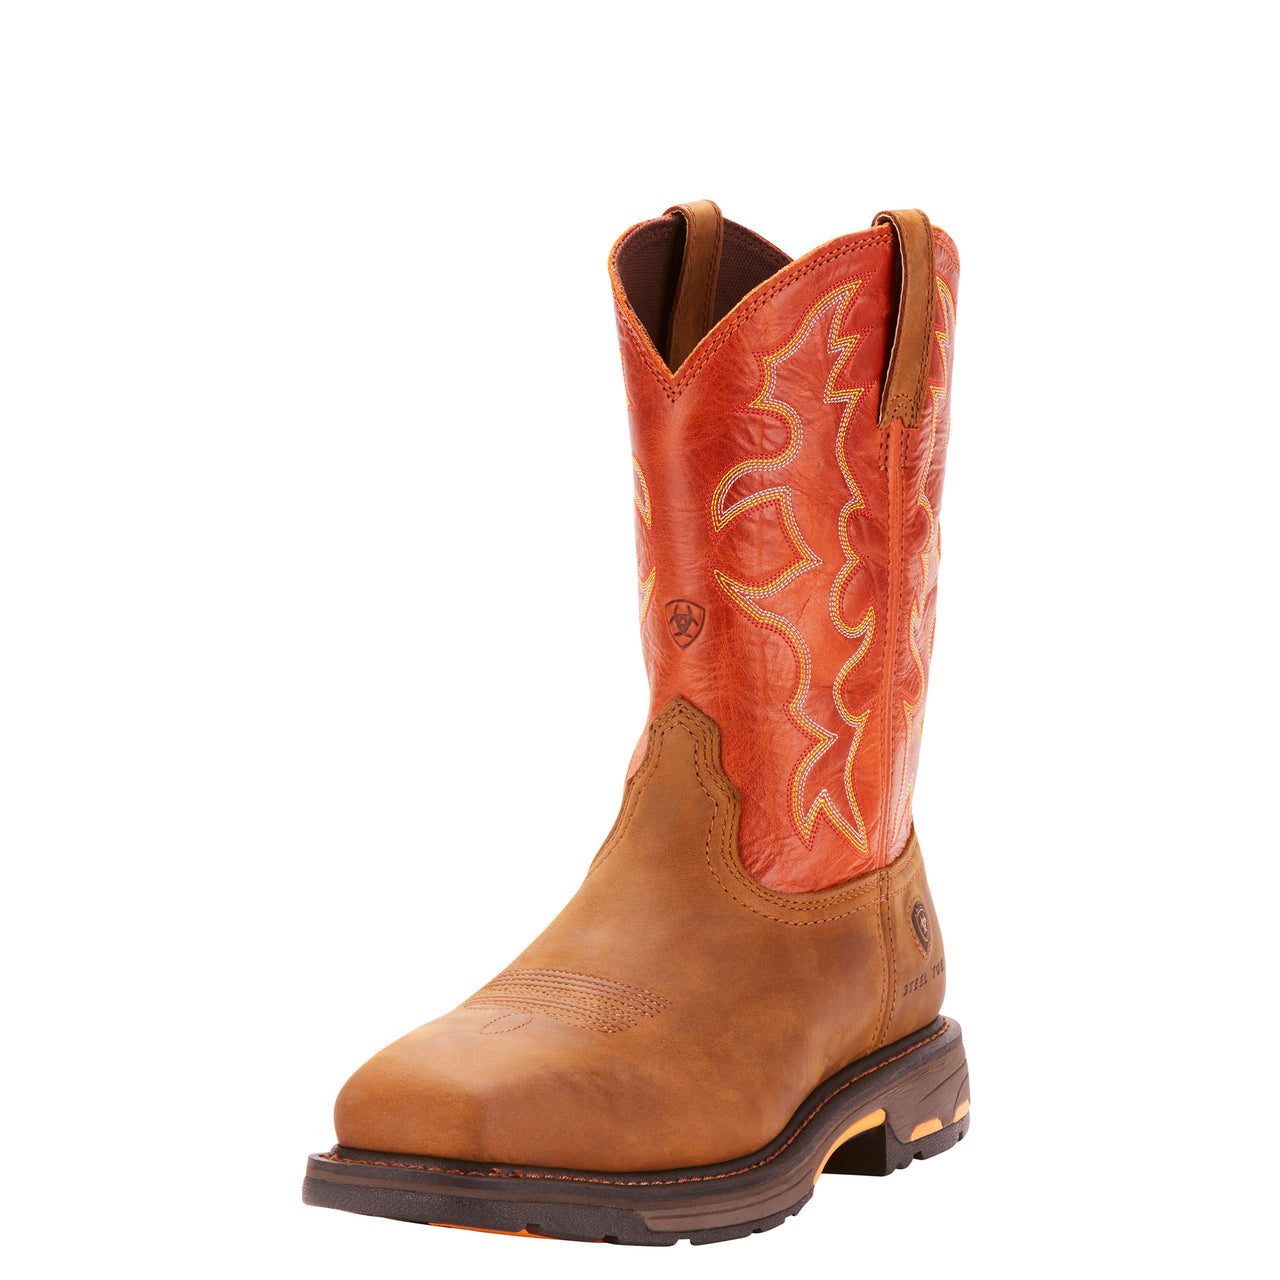 Ariat Workhog Wide Square Toe Boot 12.5 D